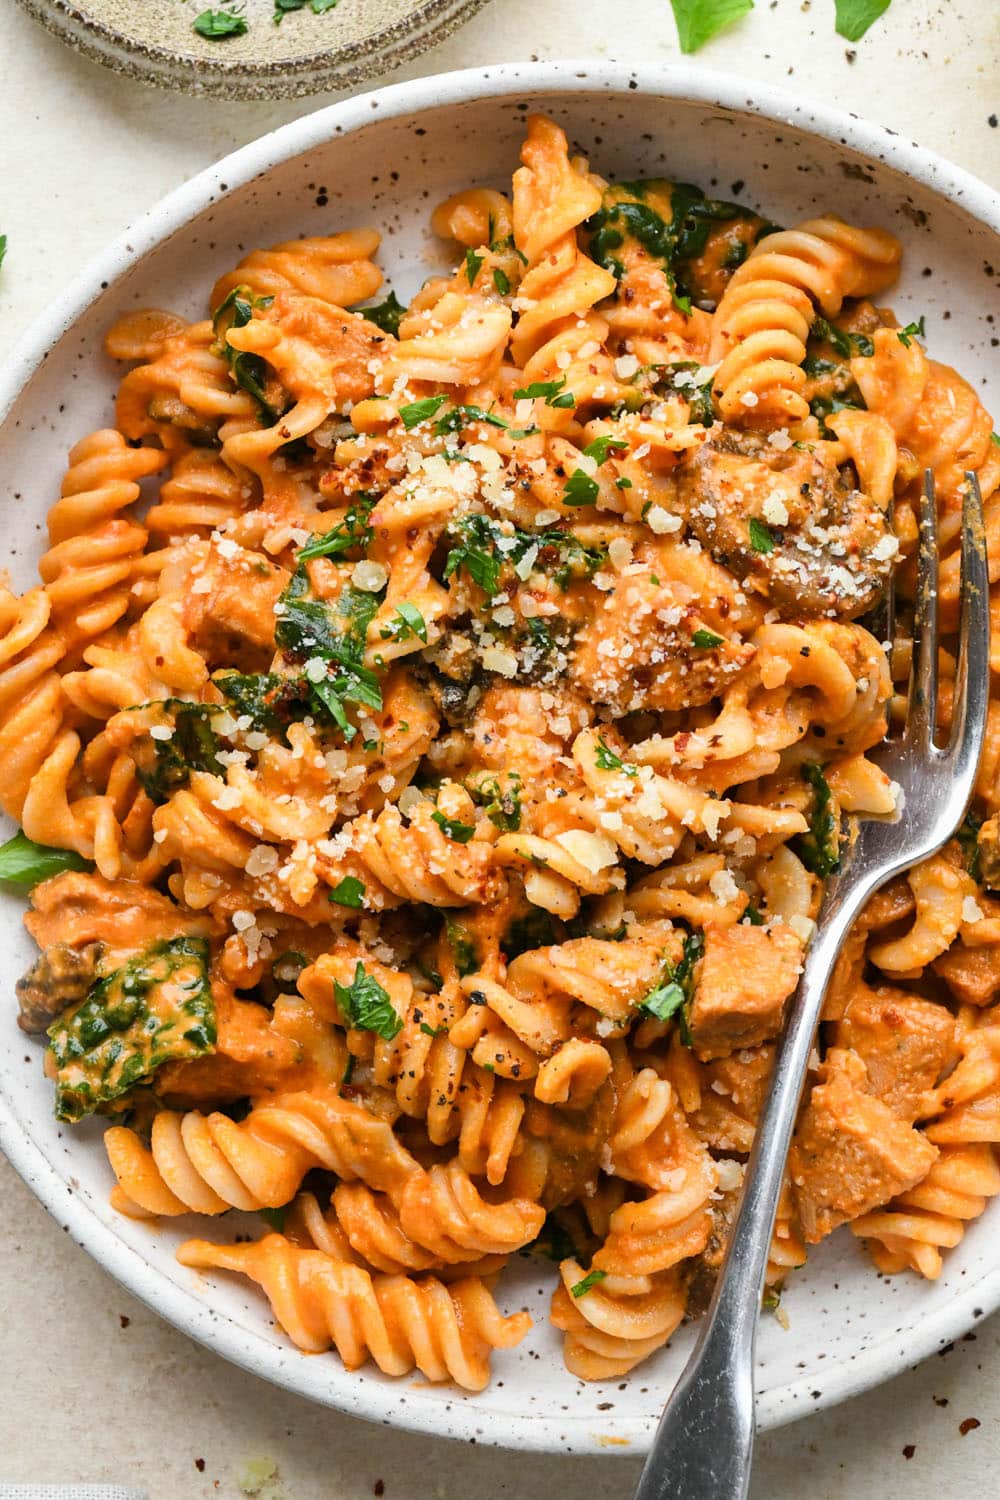 Creamy tomato sausage pasta in a shallow white speckled bowl, topped with dairy free parmesan, chili flakes, and a fresh herbs.